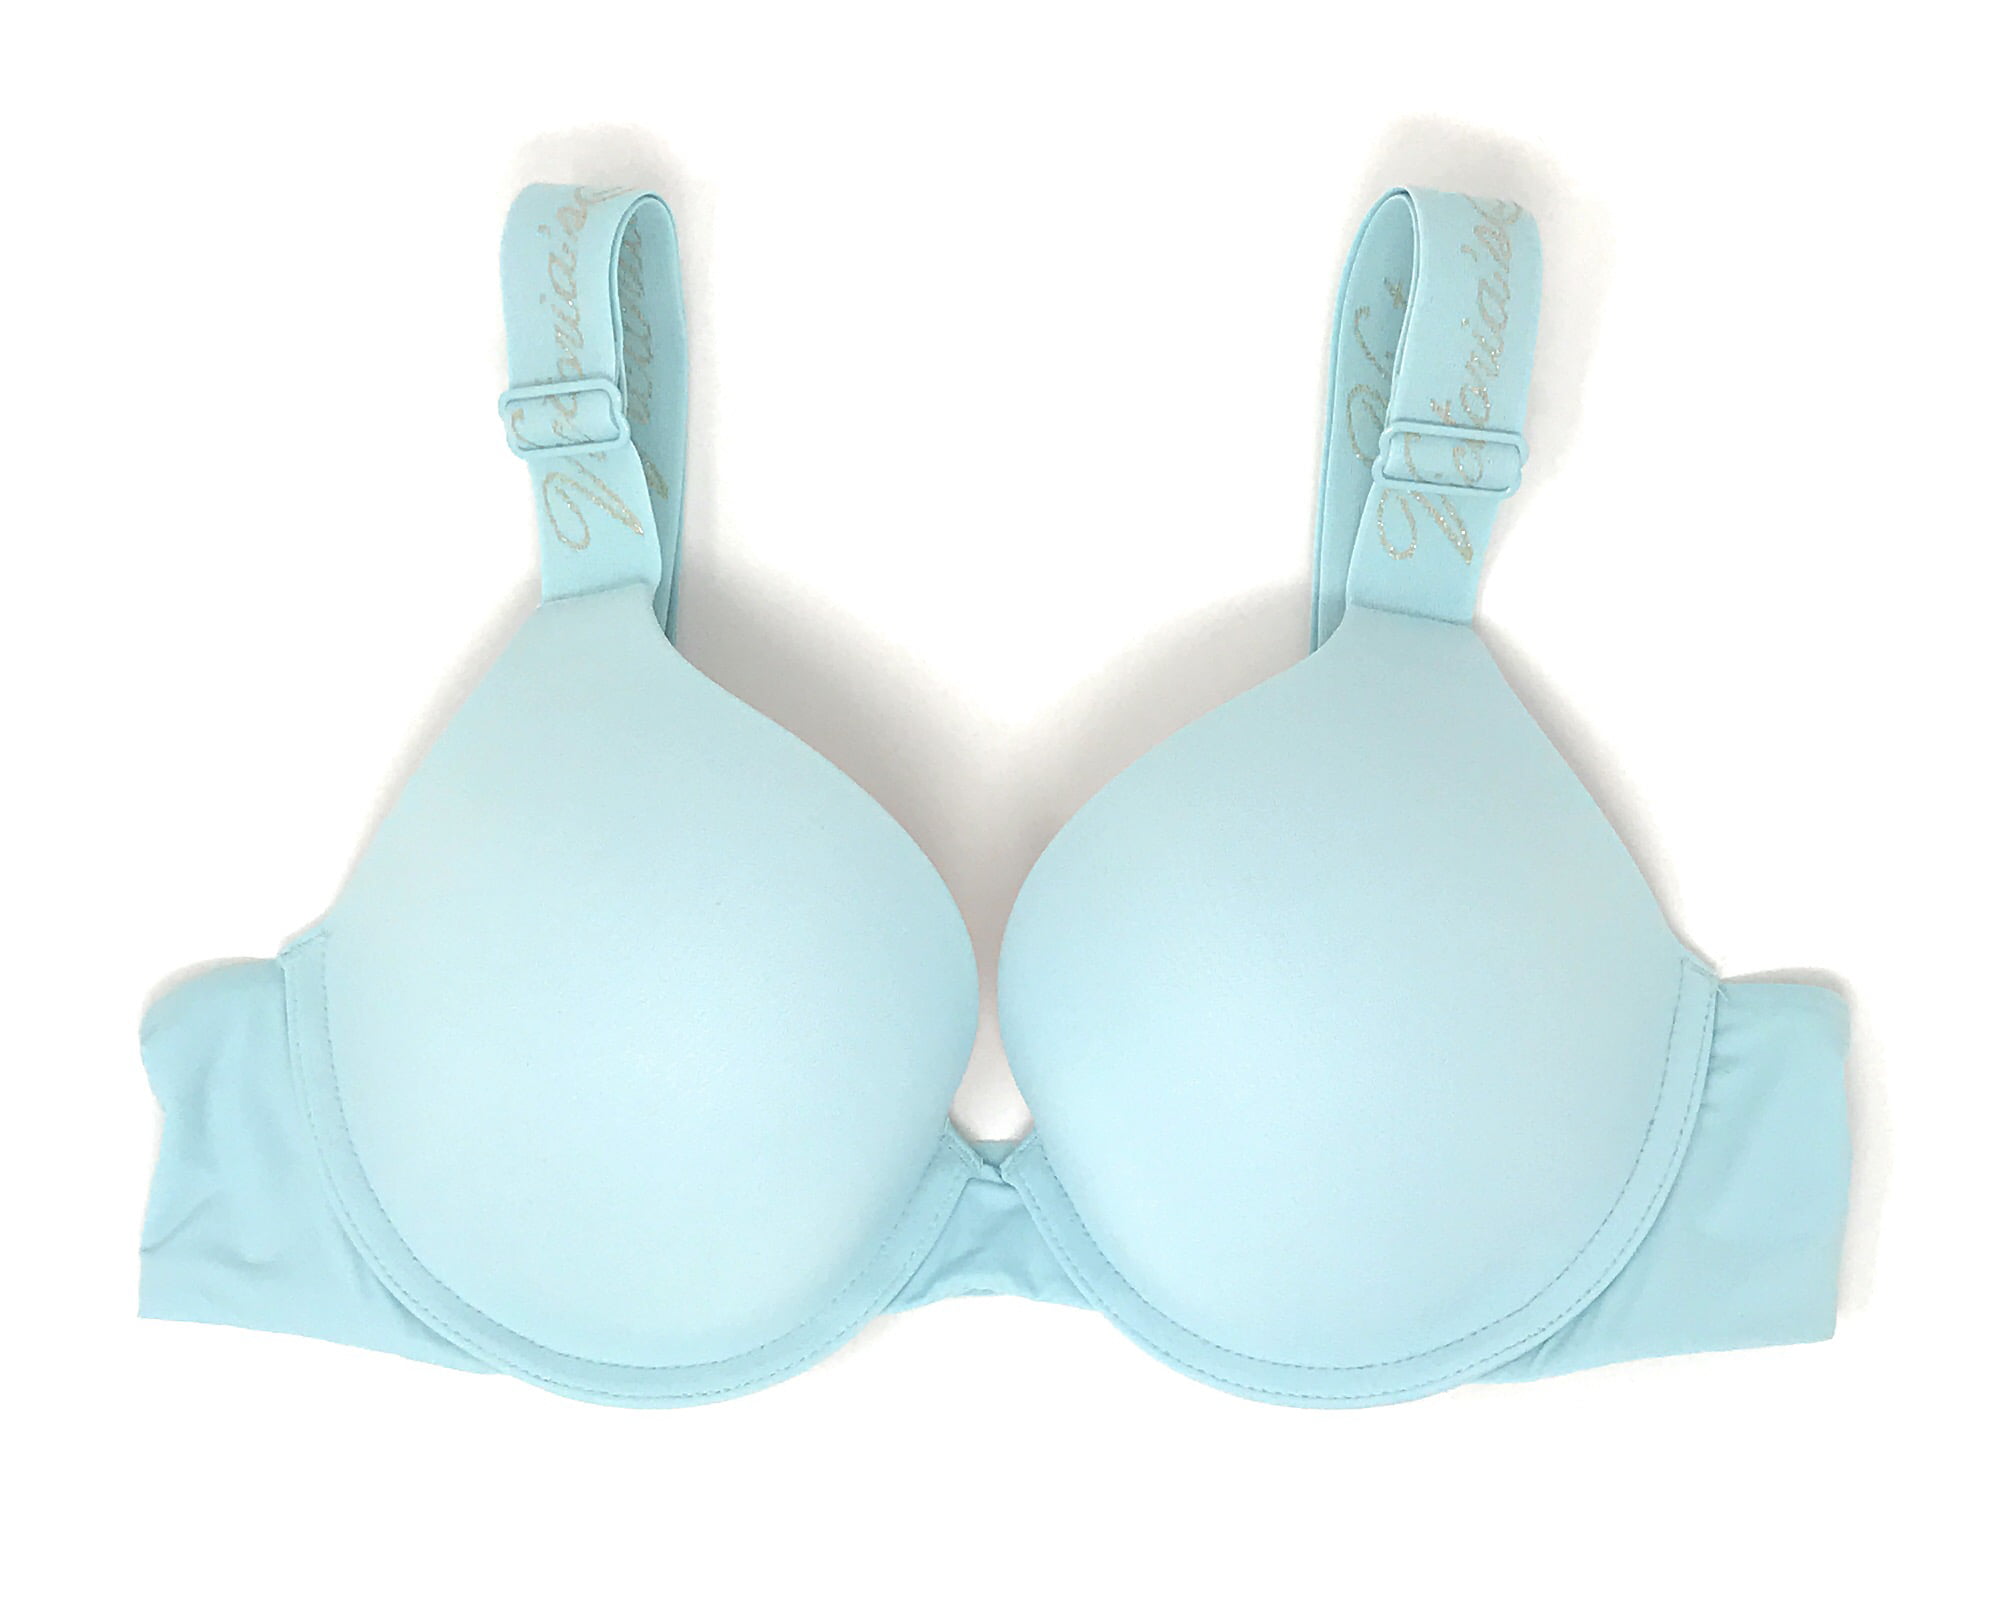 Victorias Secret Dream Uplift Bra 34A Blue Underwire Padded For Push Up  Biofit - Helia Beer Co